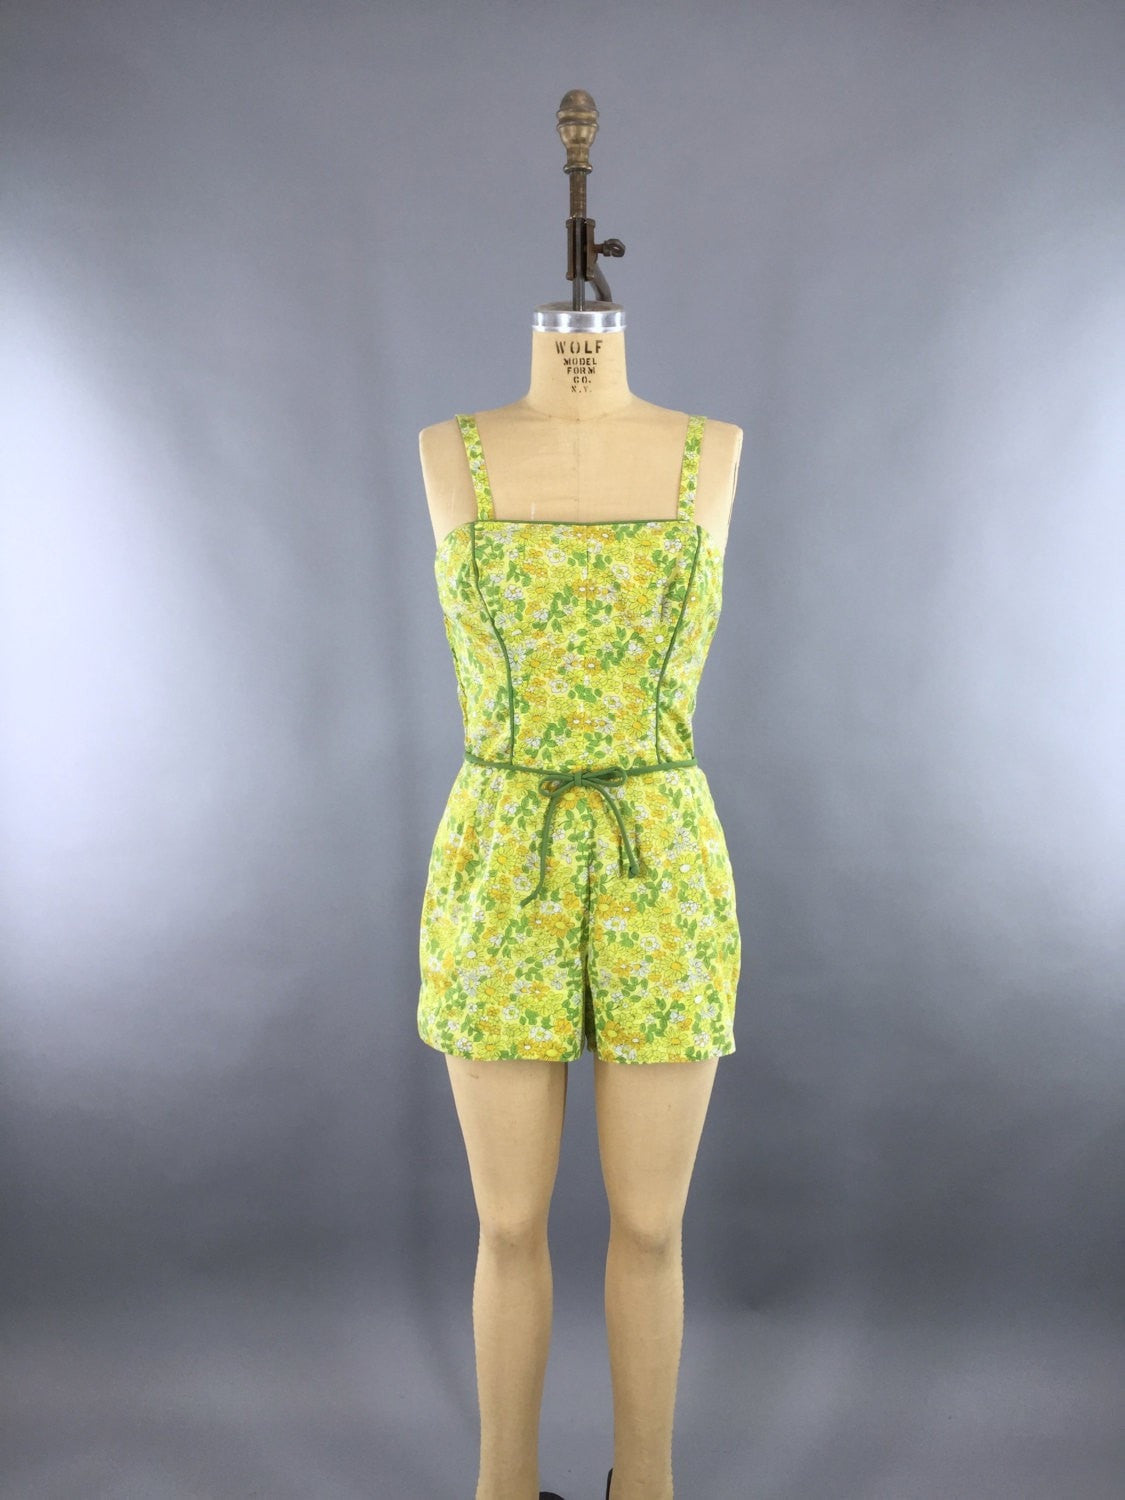 Vintage 1950s Roxanne Romper Playsuit with Yellow Floral Print - ThisBlueBird